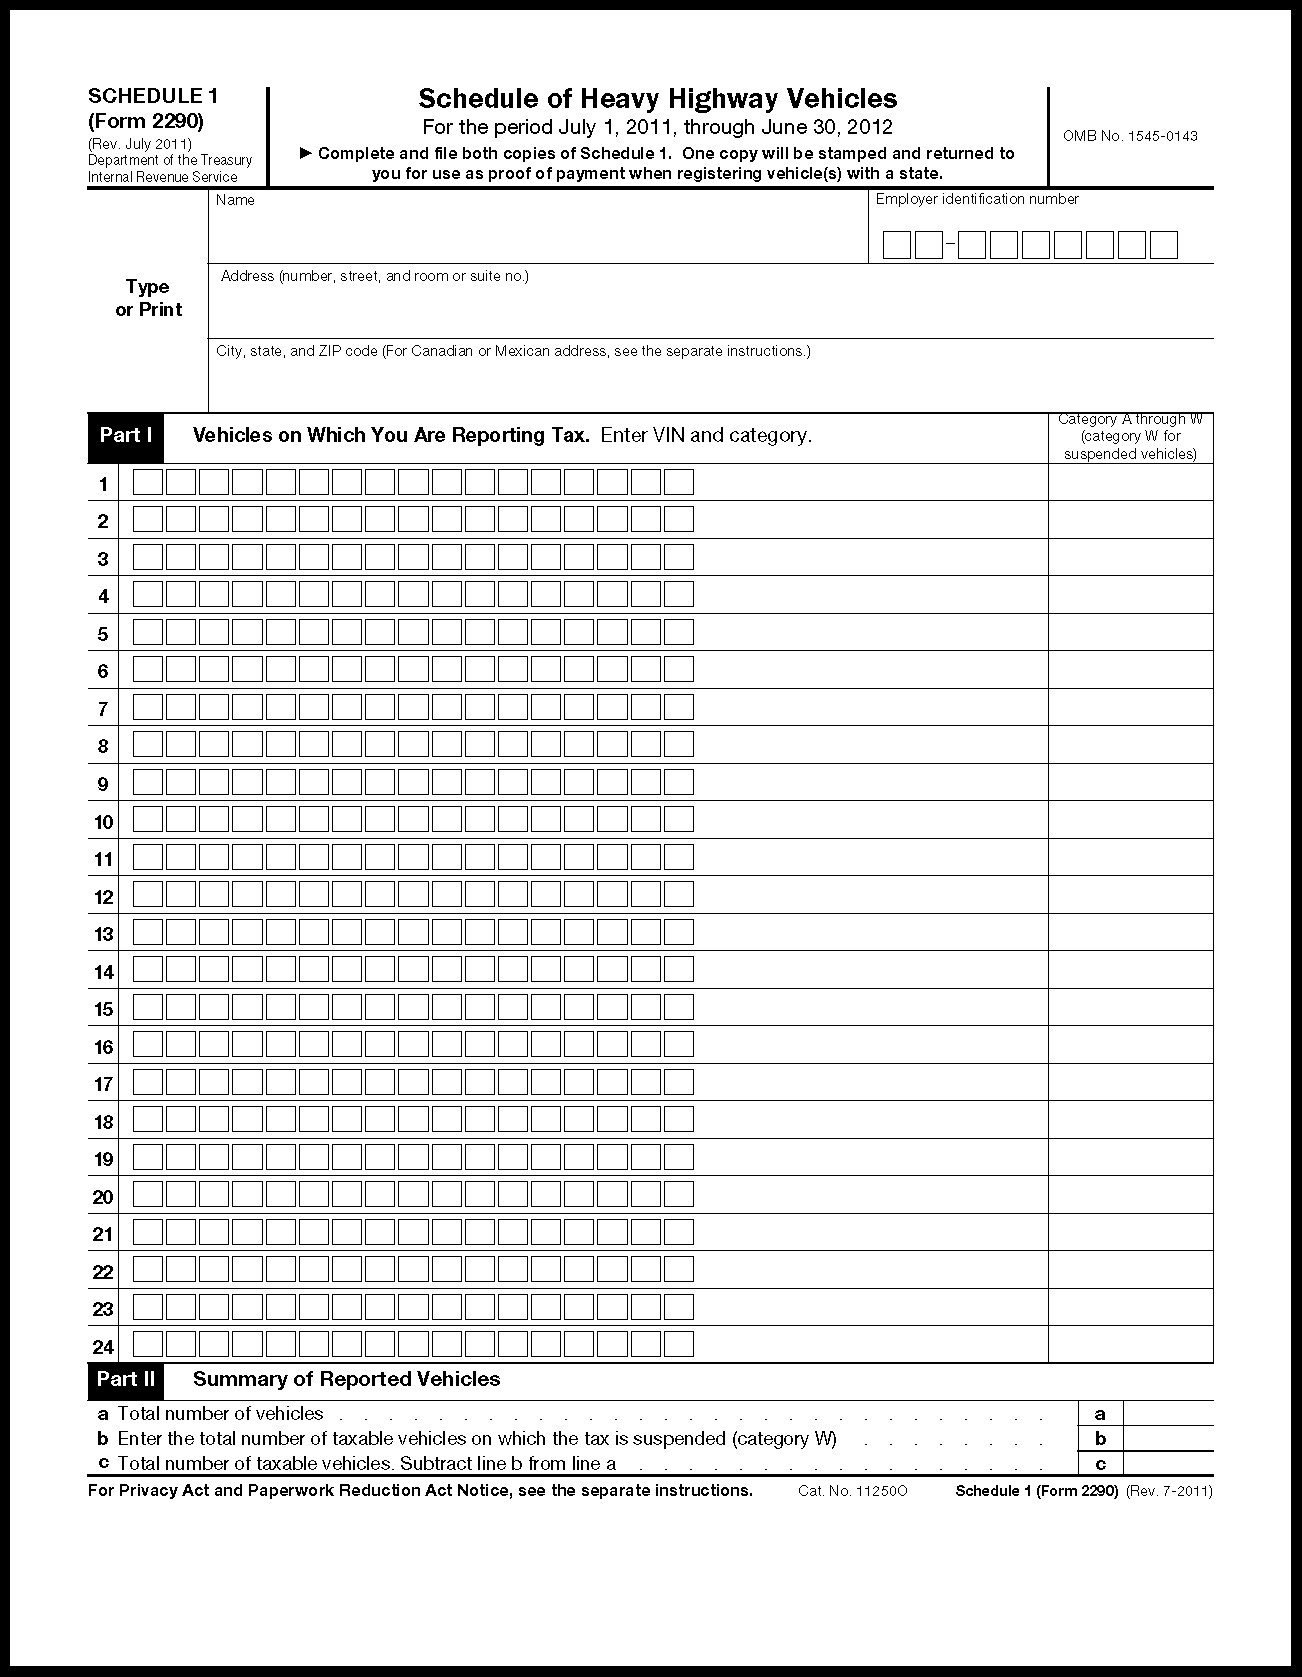 Form 2290 Irs Instructions